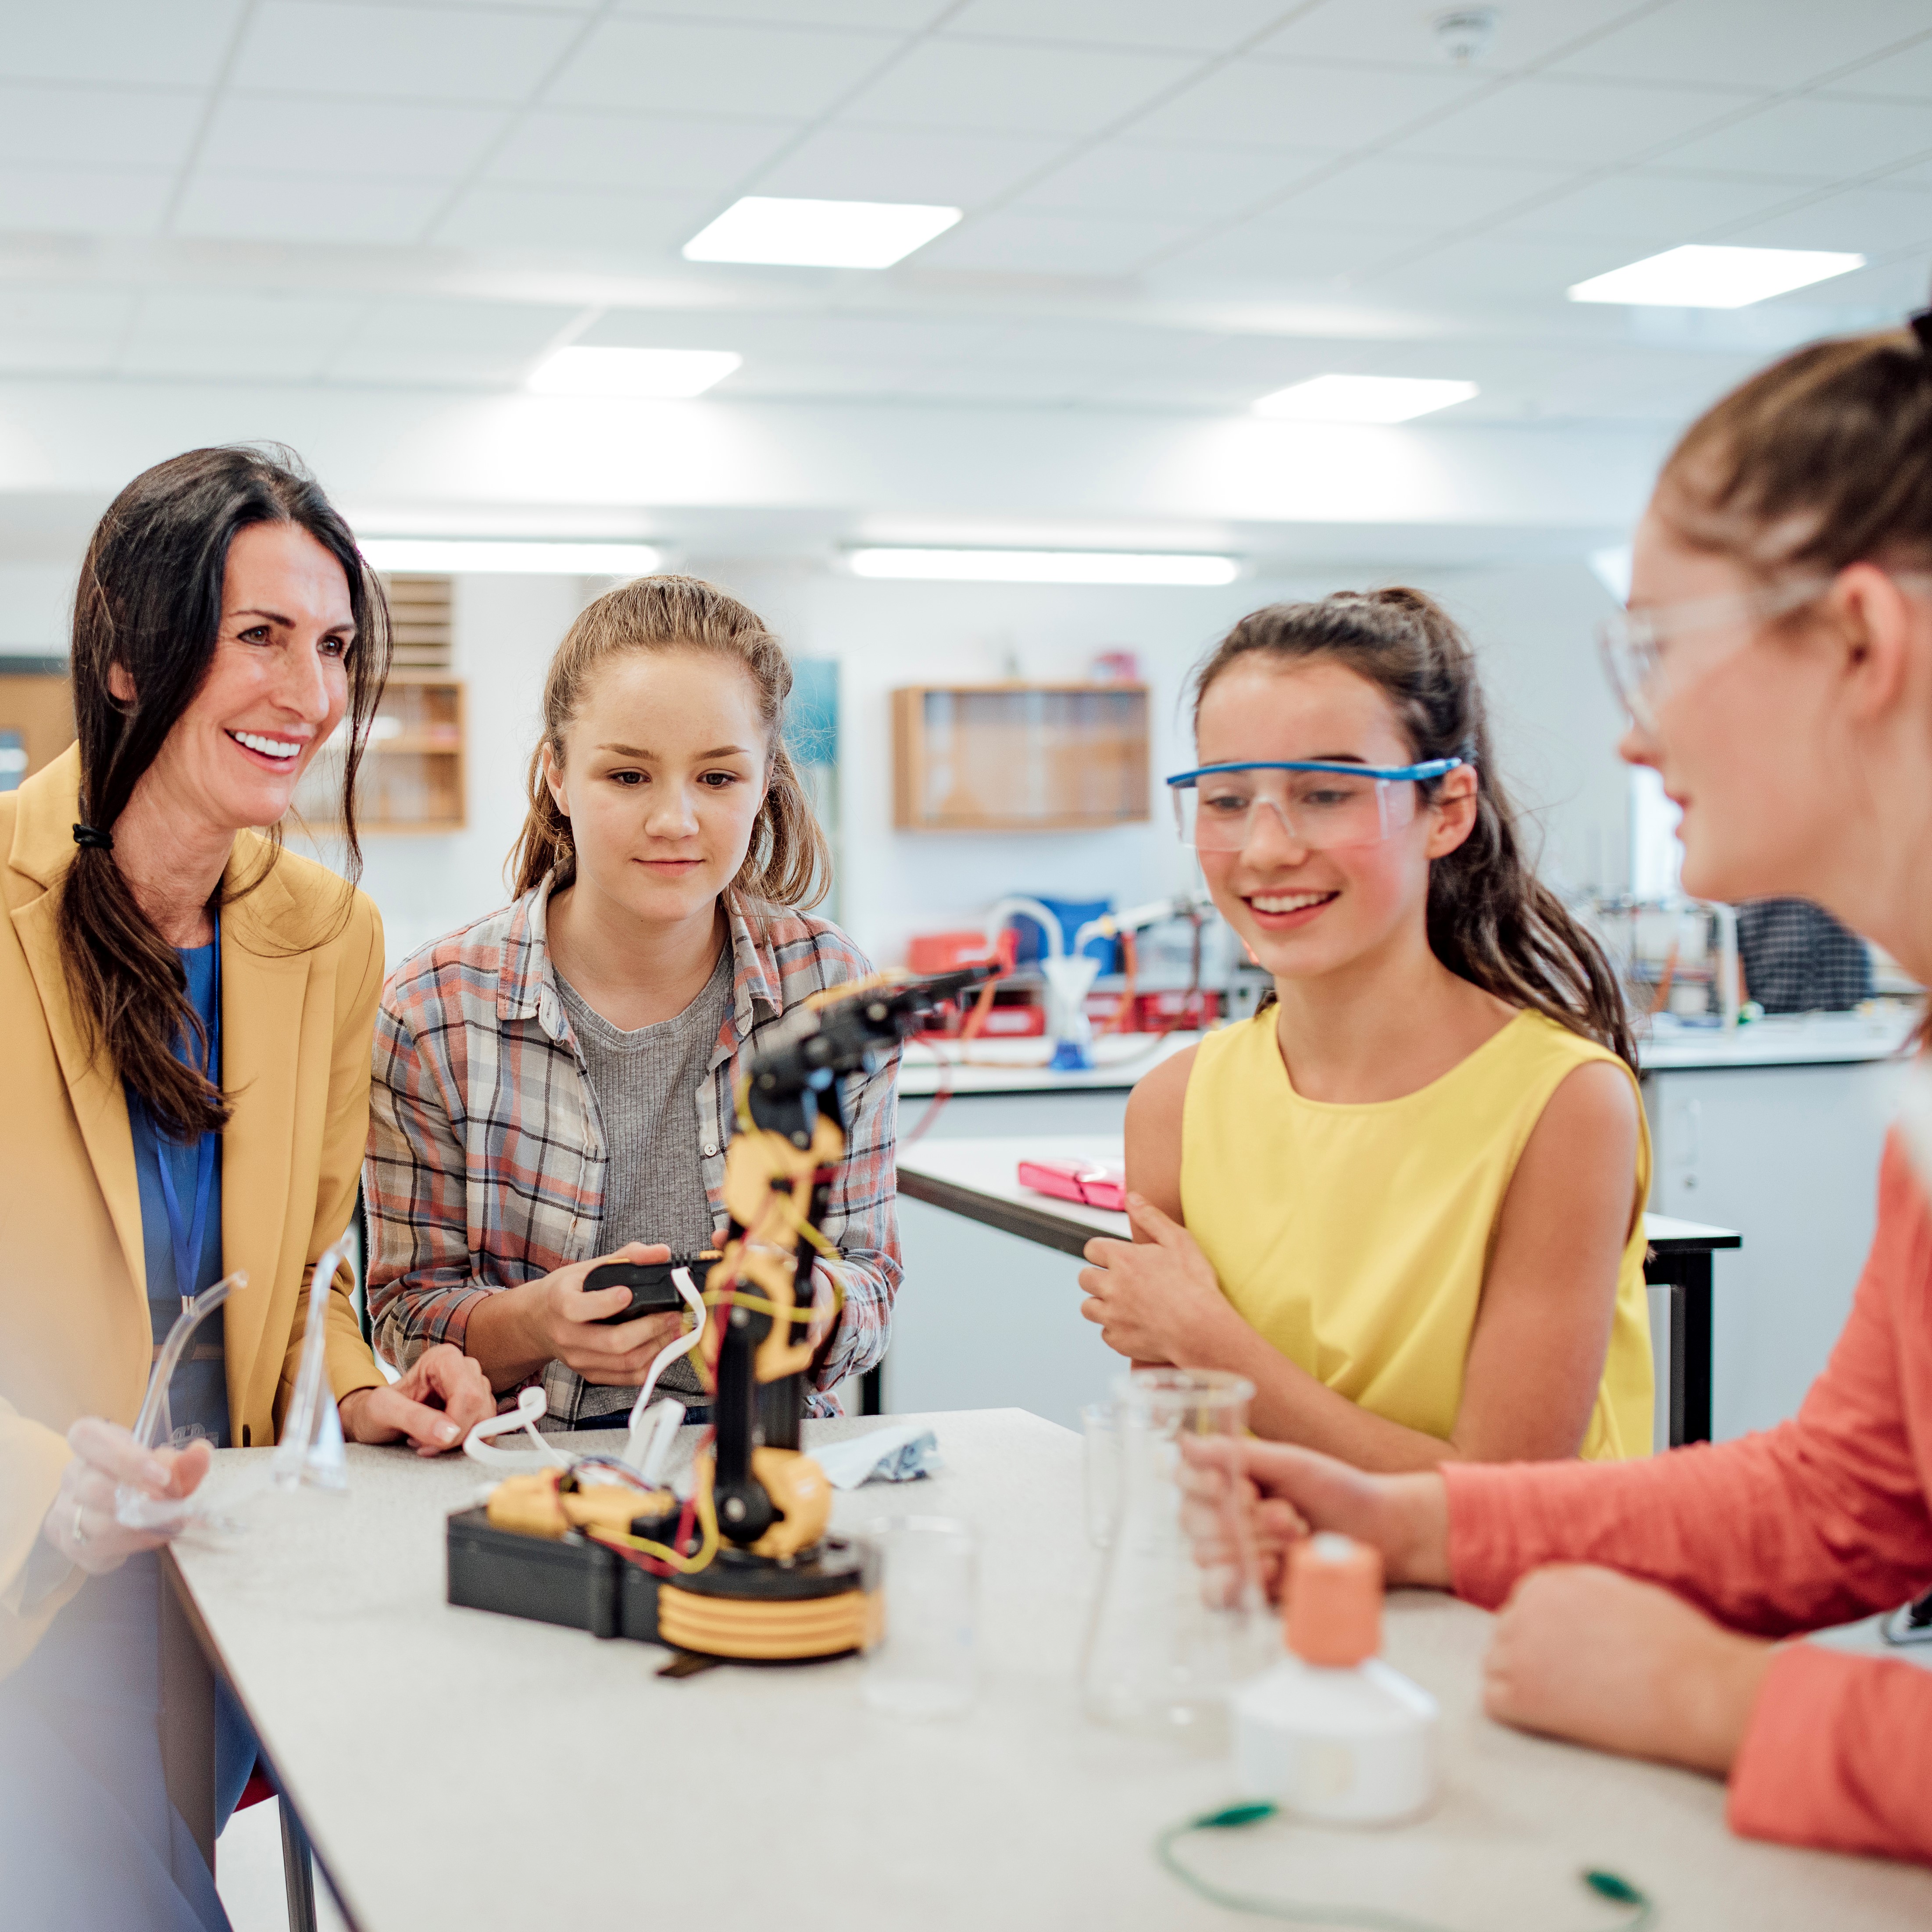 Investing in the Future of Female Engineering